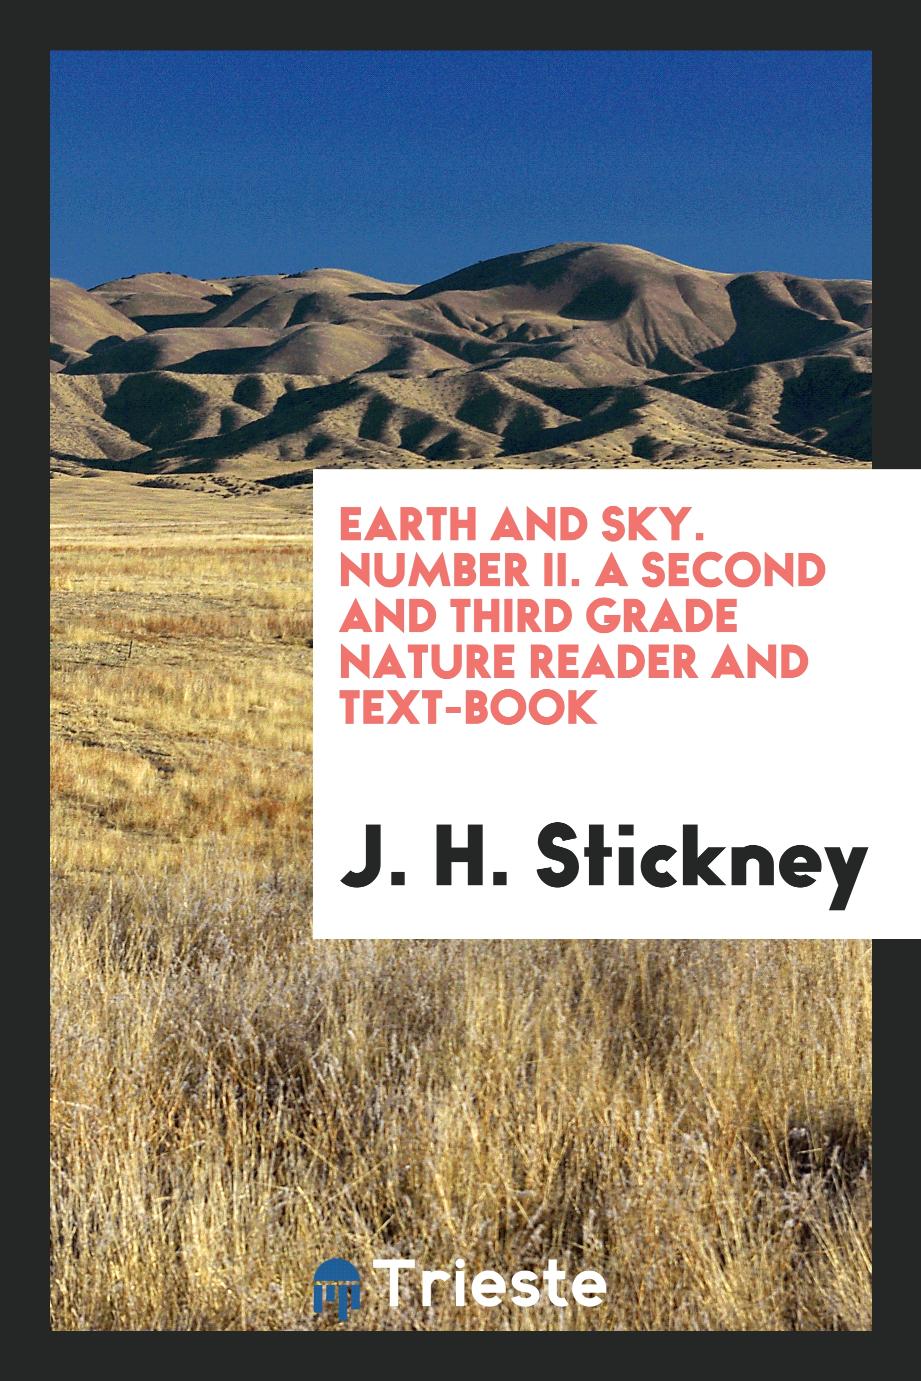 Earth and Sky. Number II. A Second and Third Grade Nature Reader and Text-Book